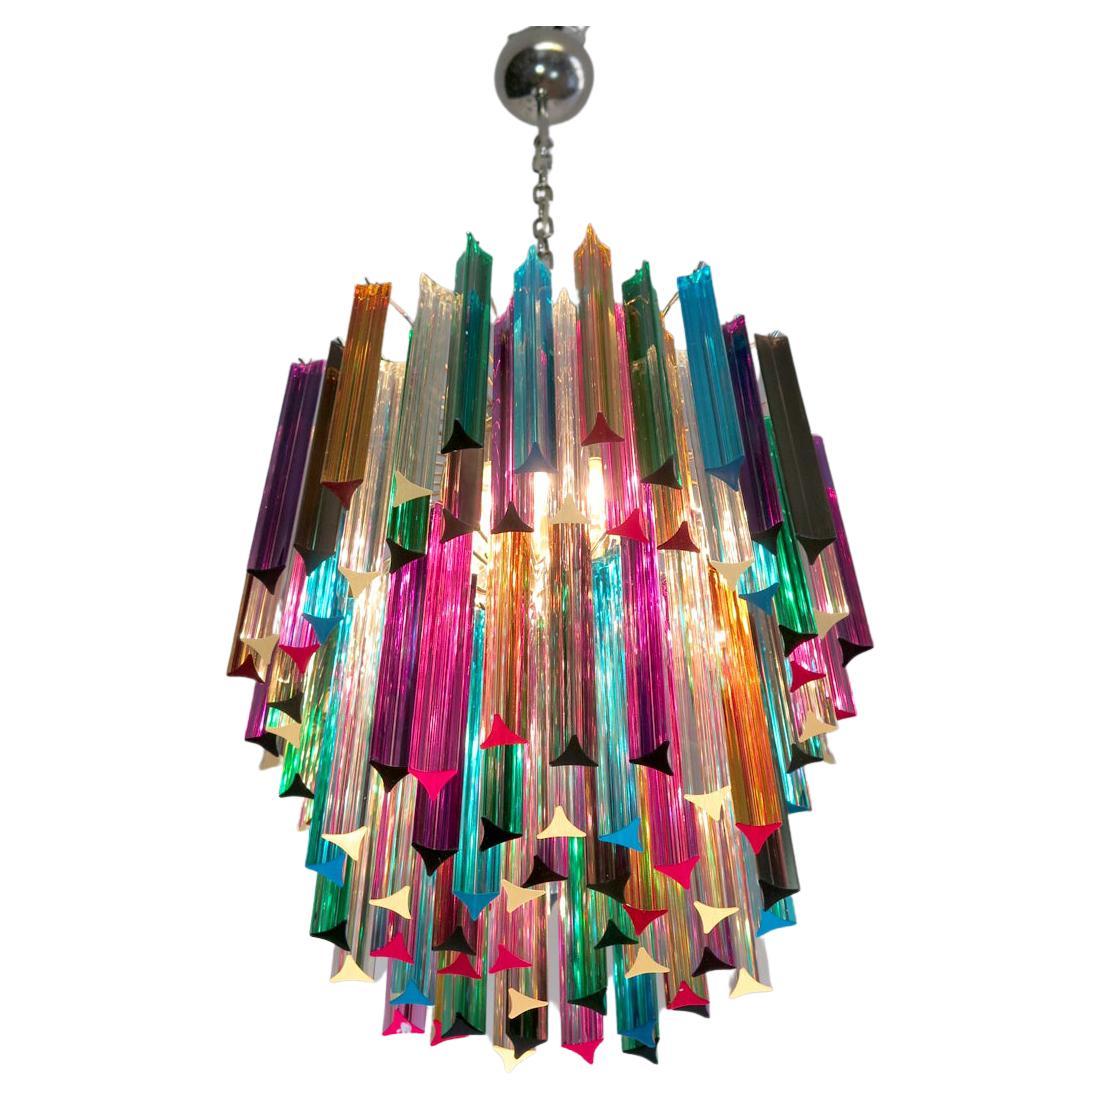 Fantastic Pair chandeliers made by 107 Murano crystal multicolored prism in a nickel metal frame. The glasses are transparent, blue, smoky, purple, green, yellow and pink.
Dimensions: 55.10 inches height (140 cm) with chain, 29.50 inches height (75